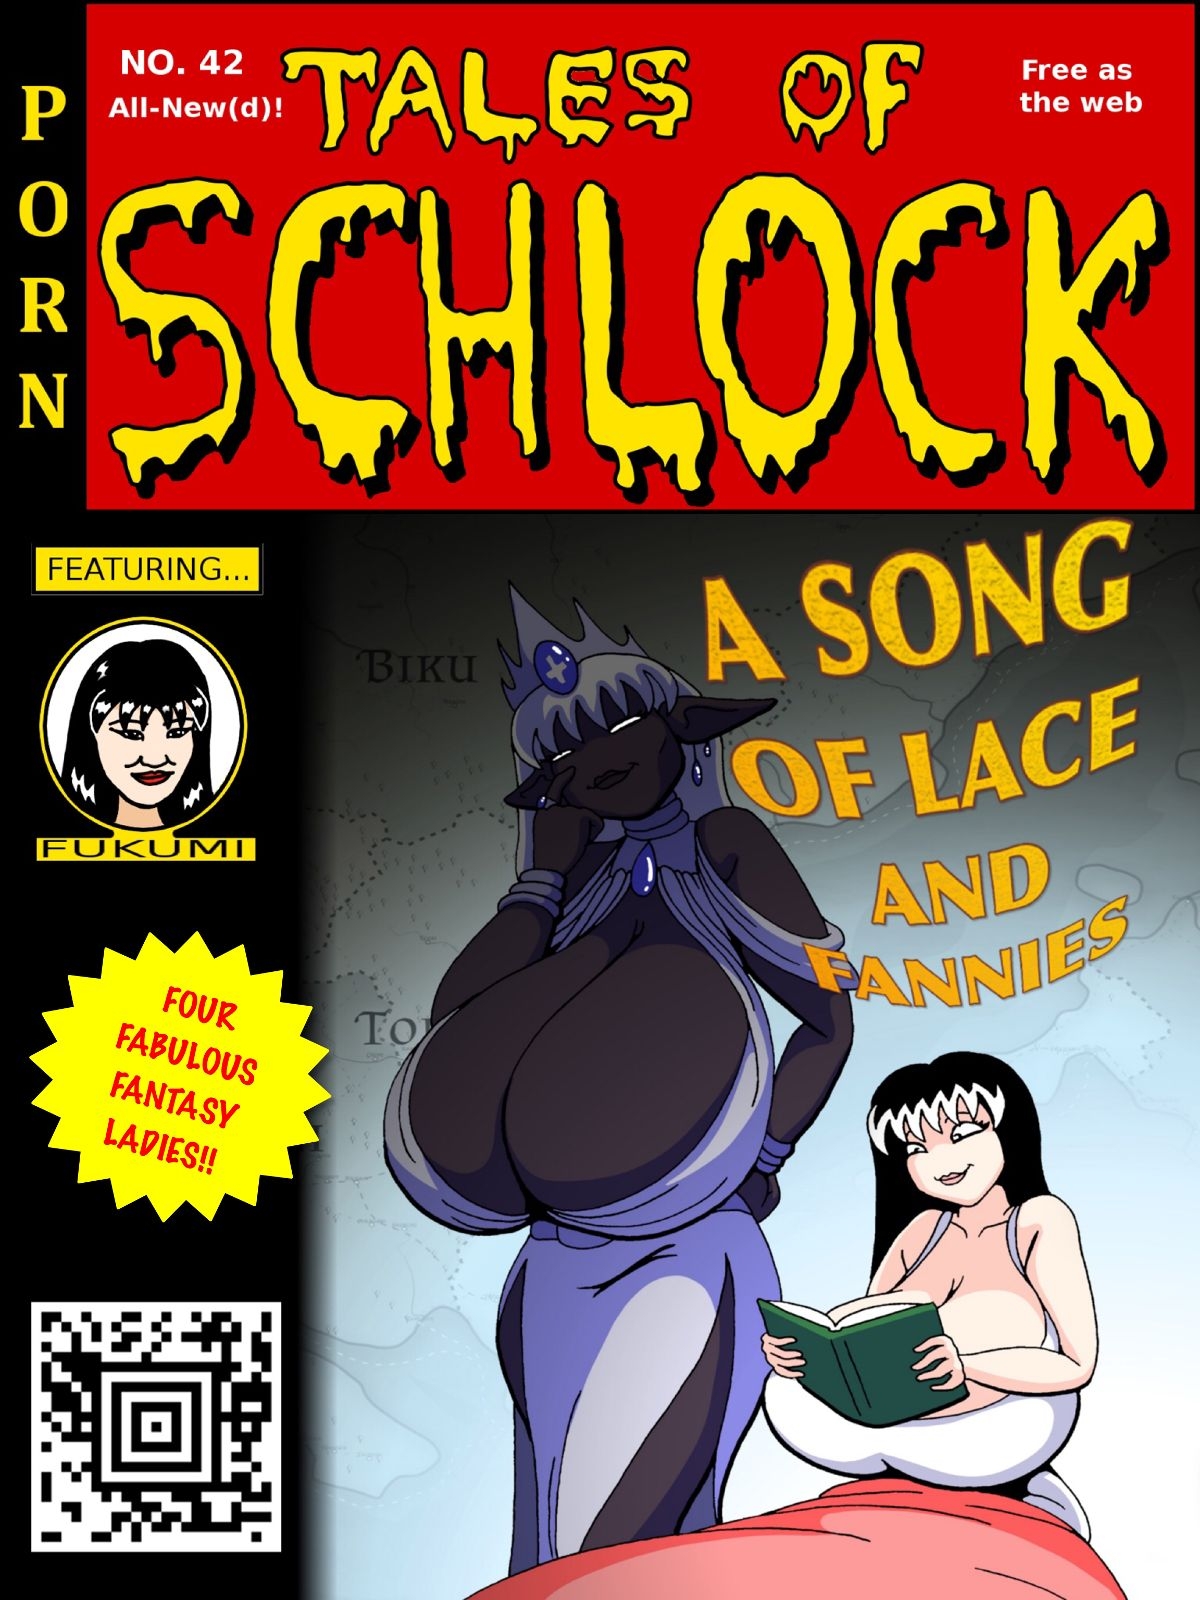 [Rampant404] Tales of Schlock #42 : A Song of Lace and Fannies 0